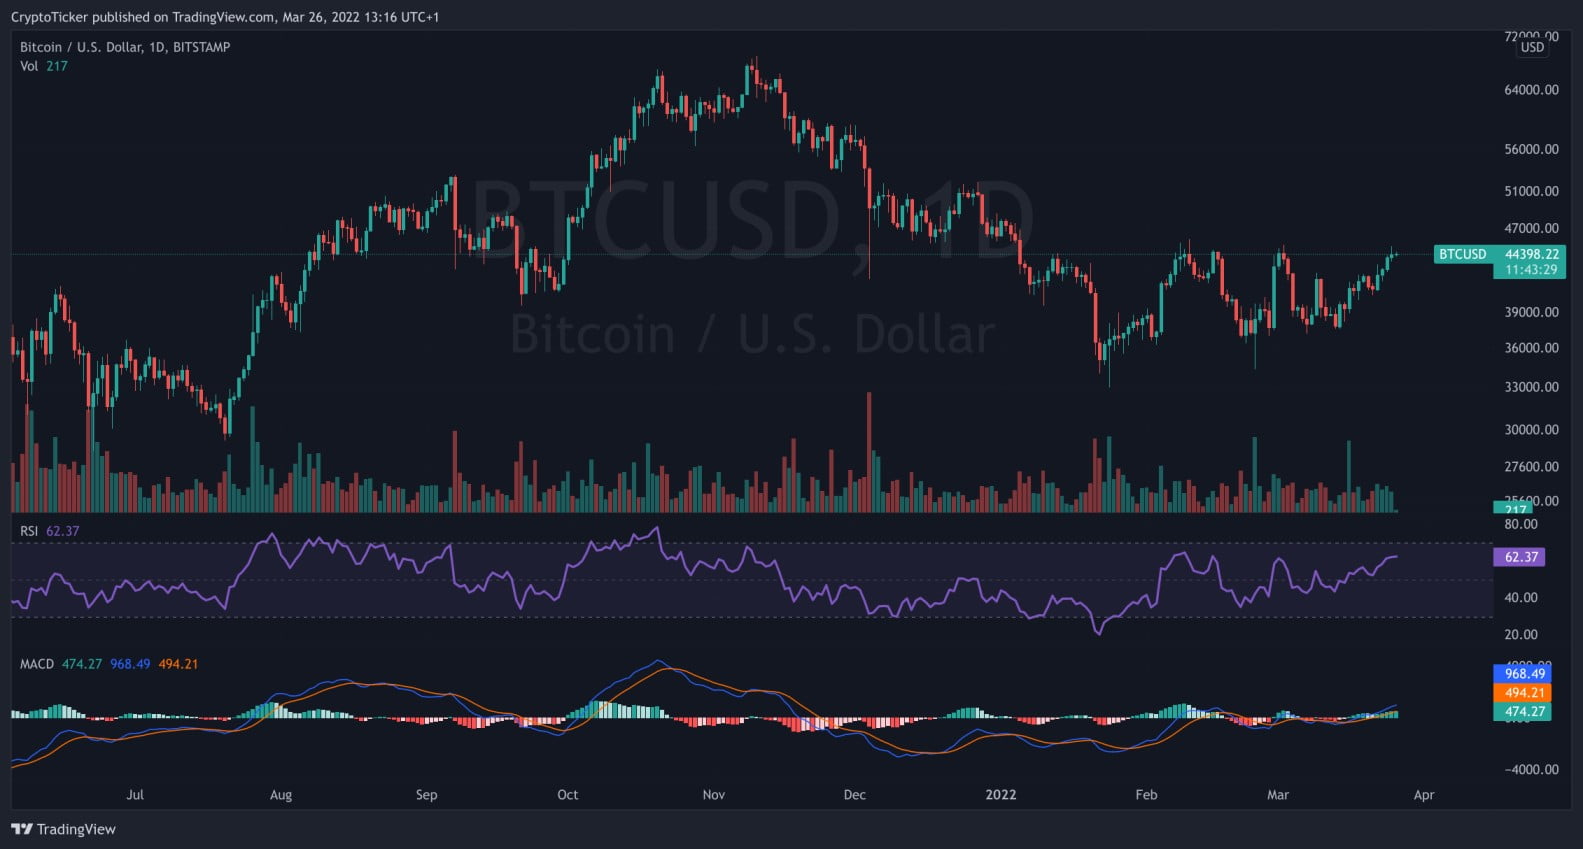 BTC/USD 1-day log chart showing the price of BTC